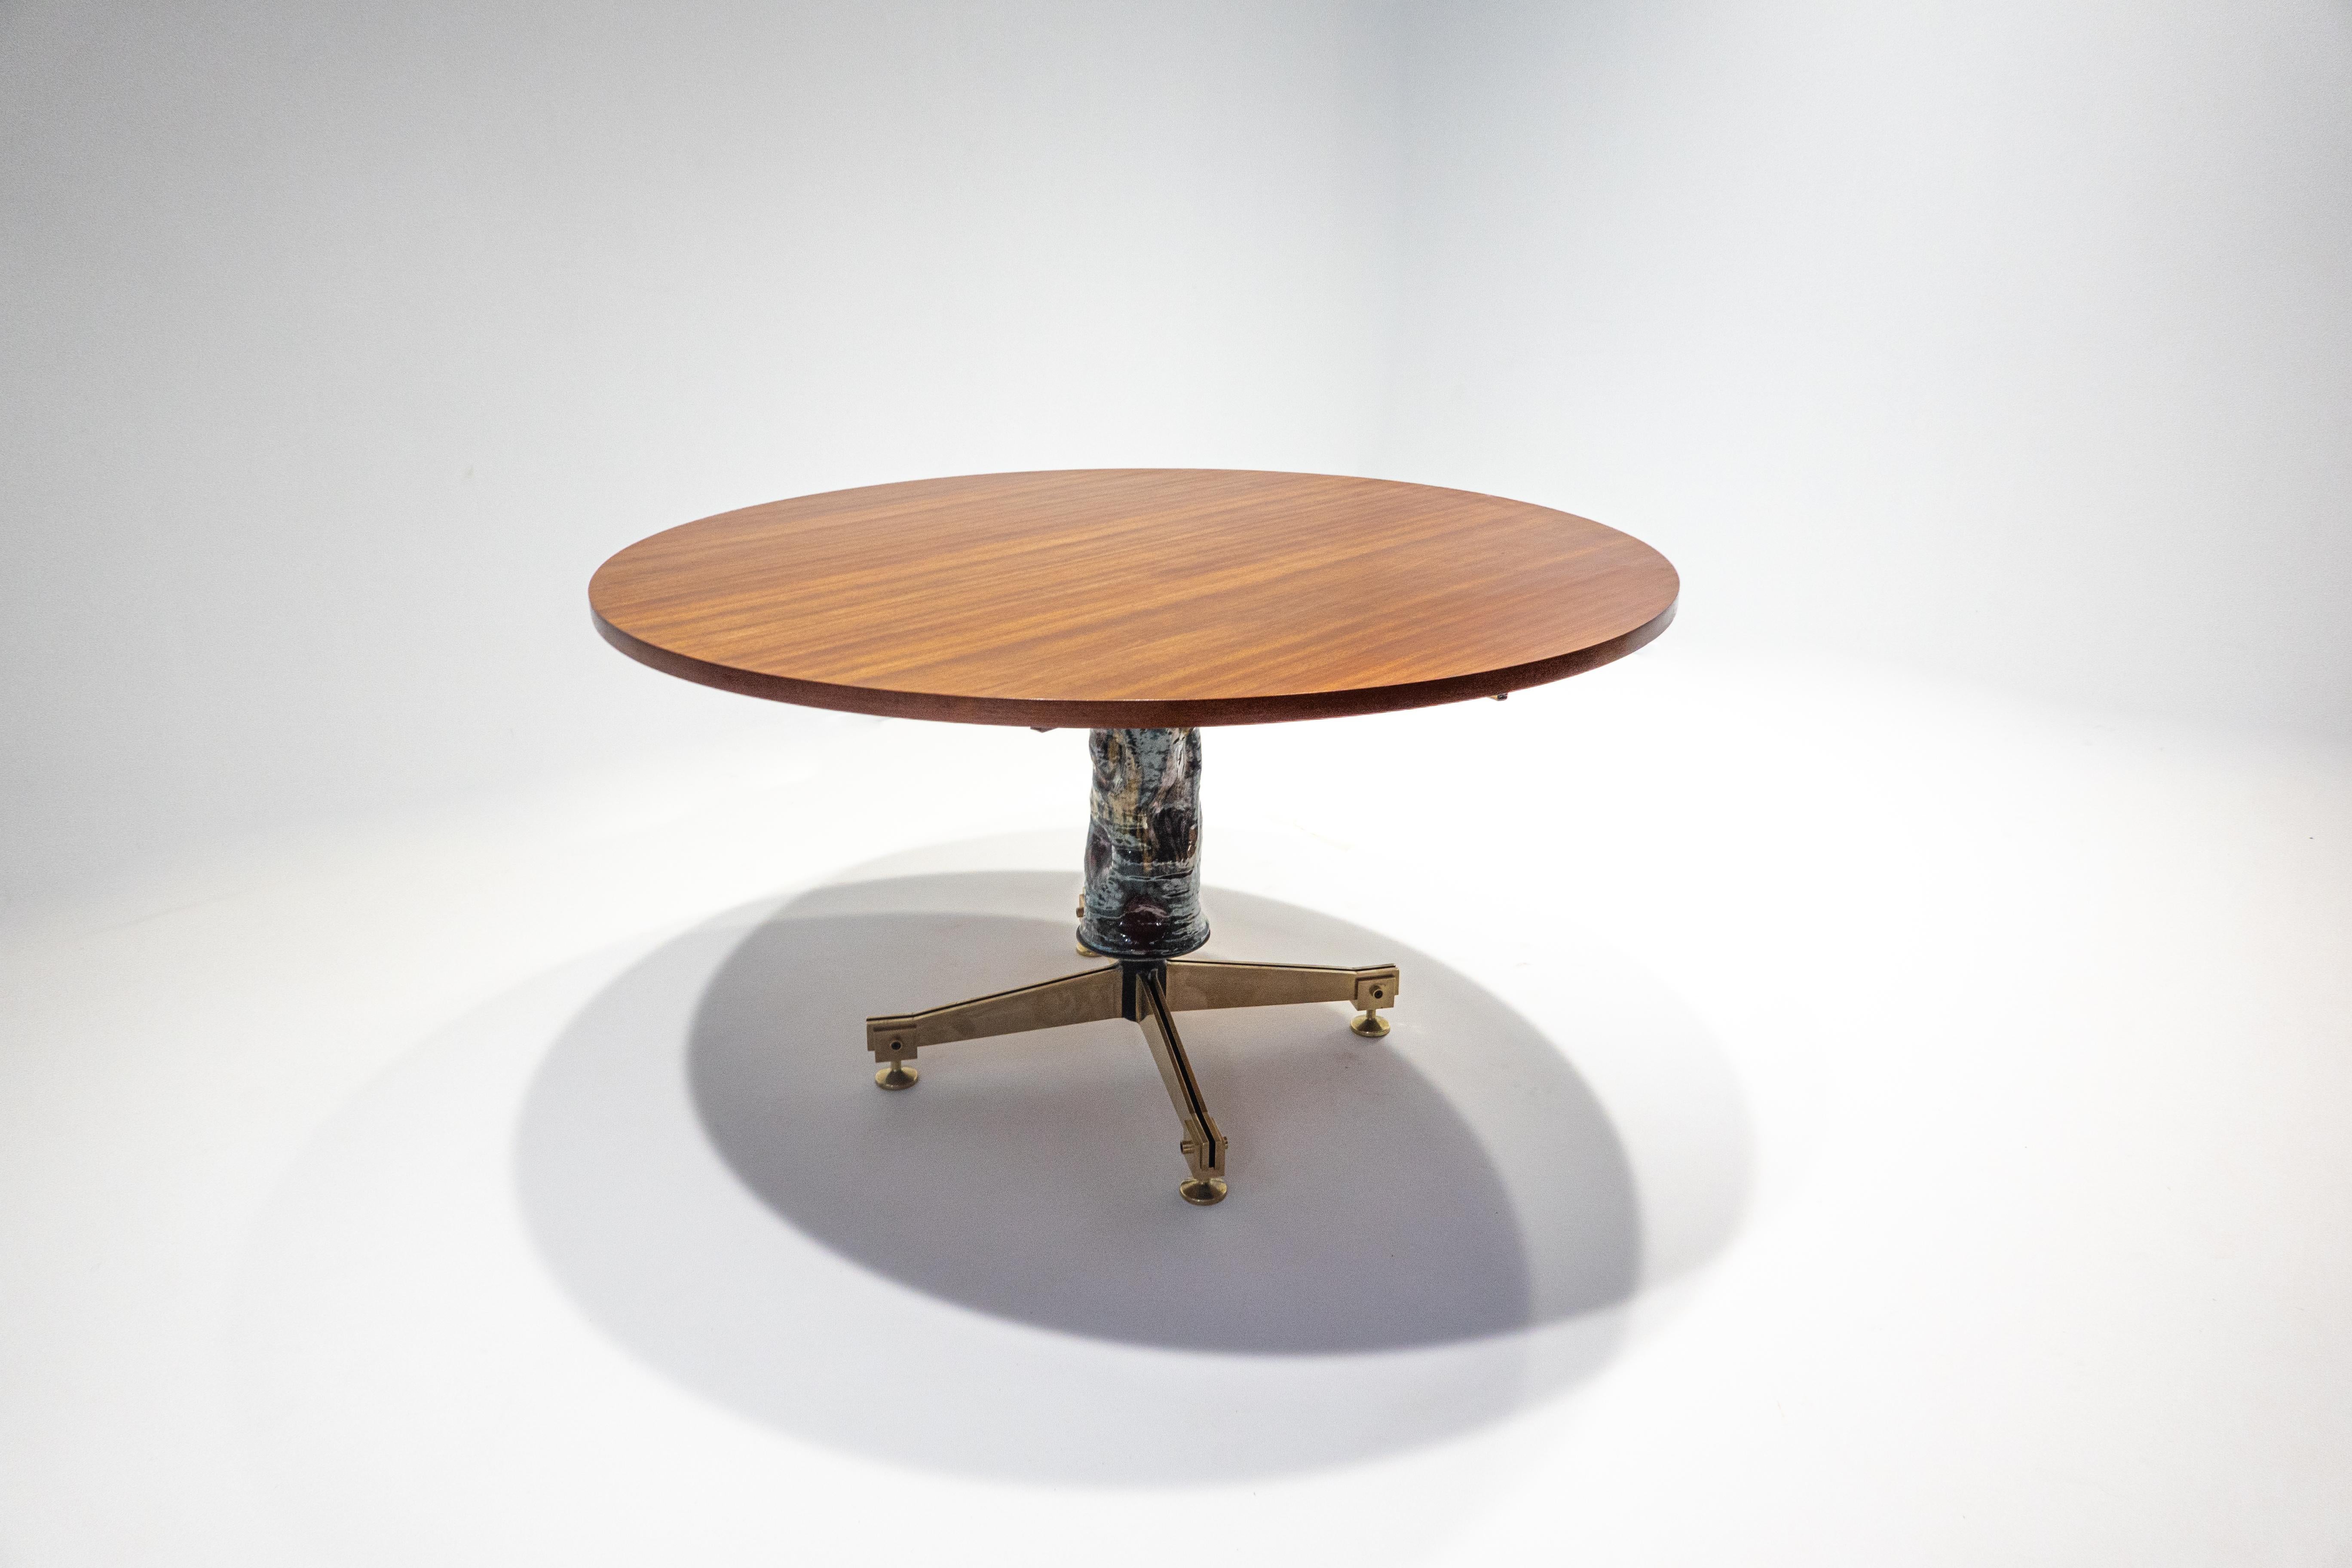 Mid-Century Modern wood and ceramic extendable dining table by Melchiorre Bega and Pietro Melandri, Italy, 1950s

Dimensions : 

139,5 to 220 cm W.